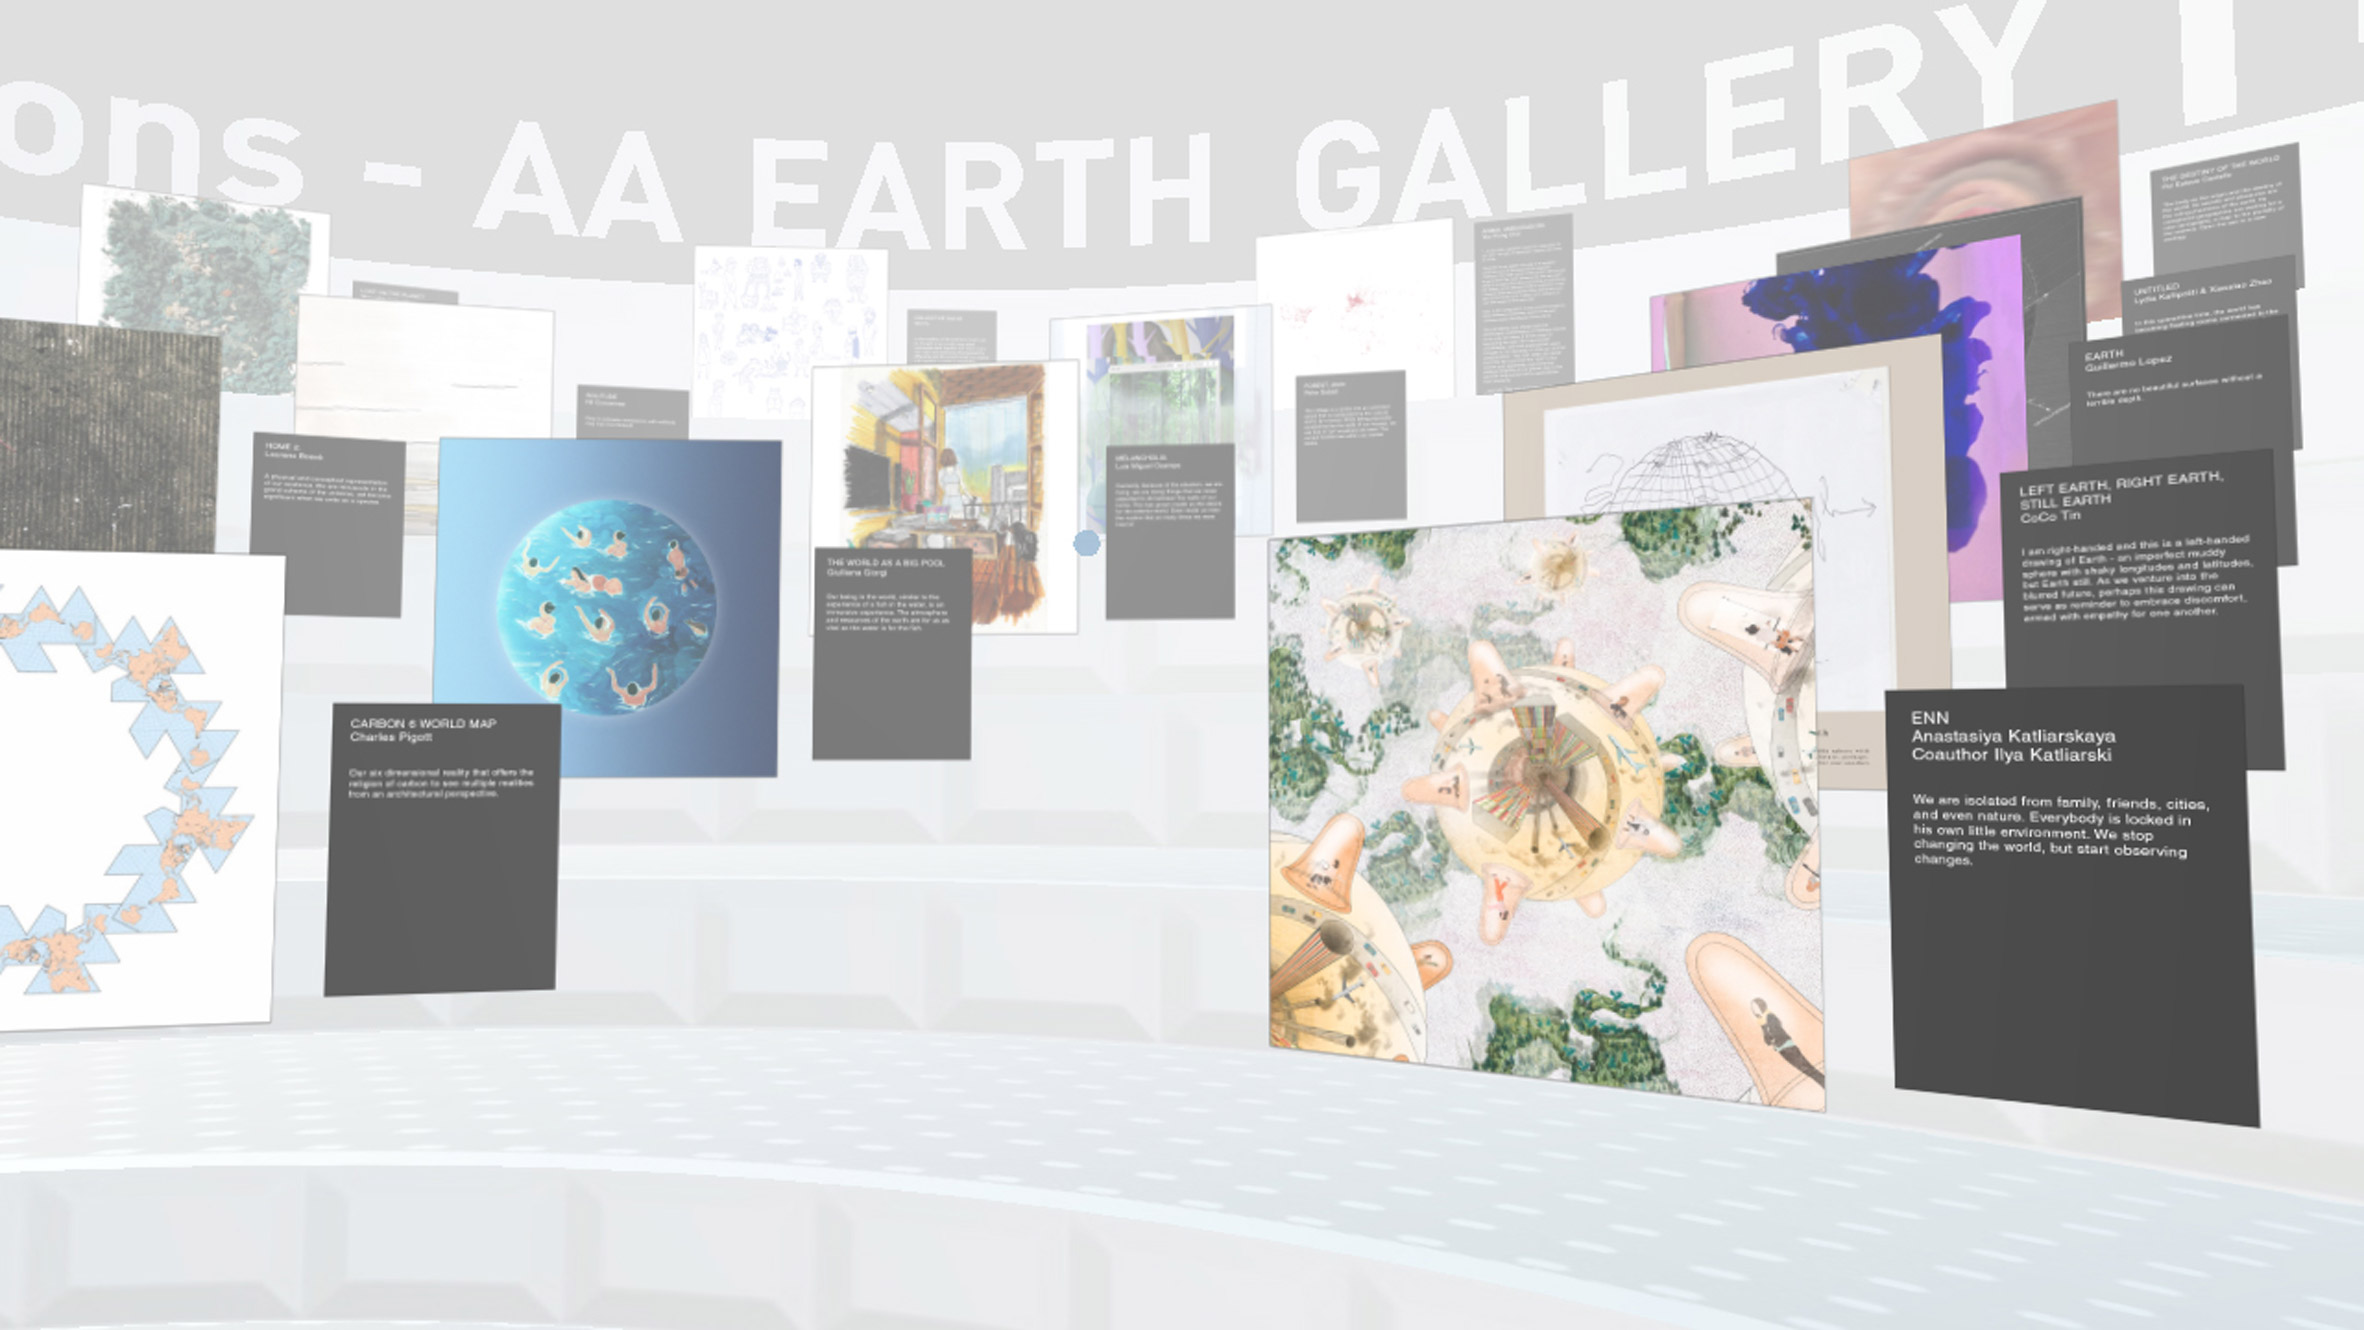 Virtual Reality art gallery by Space Popular